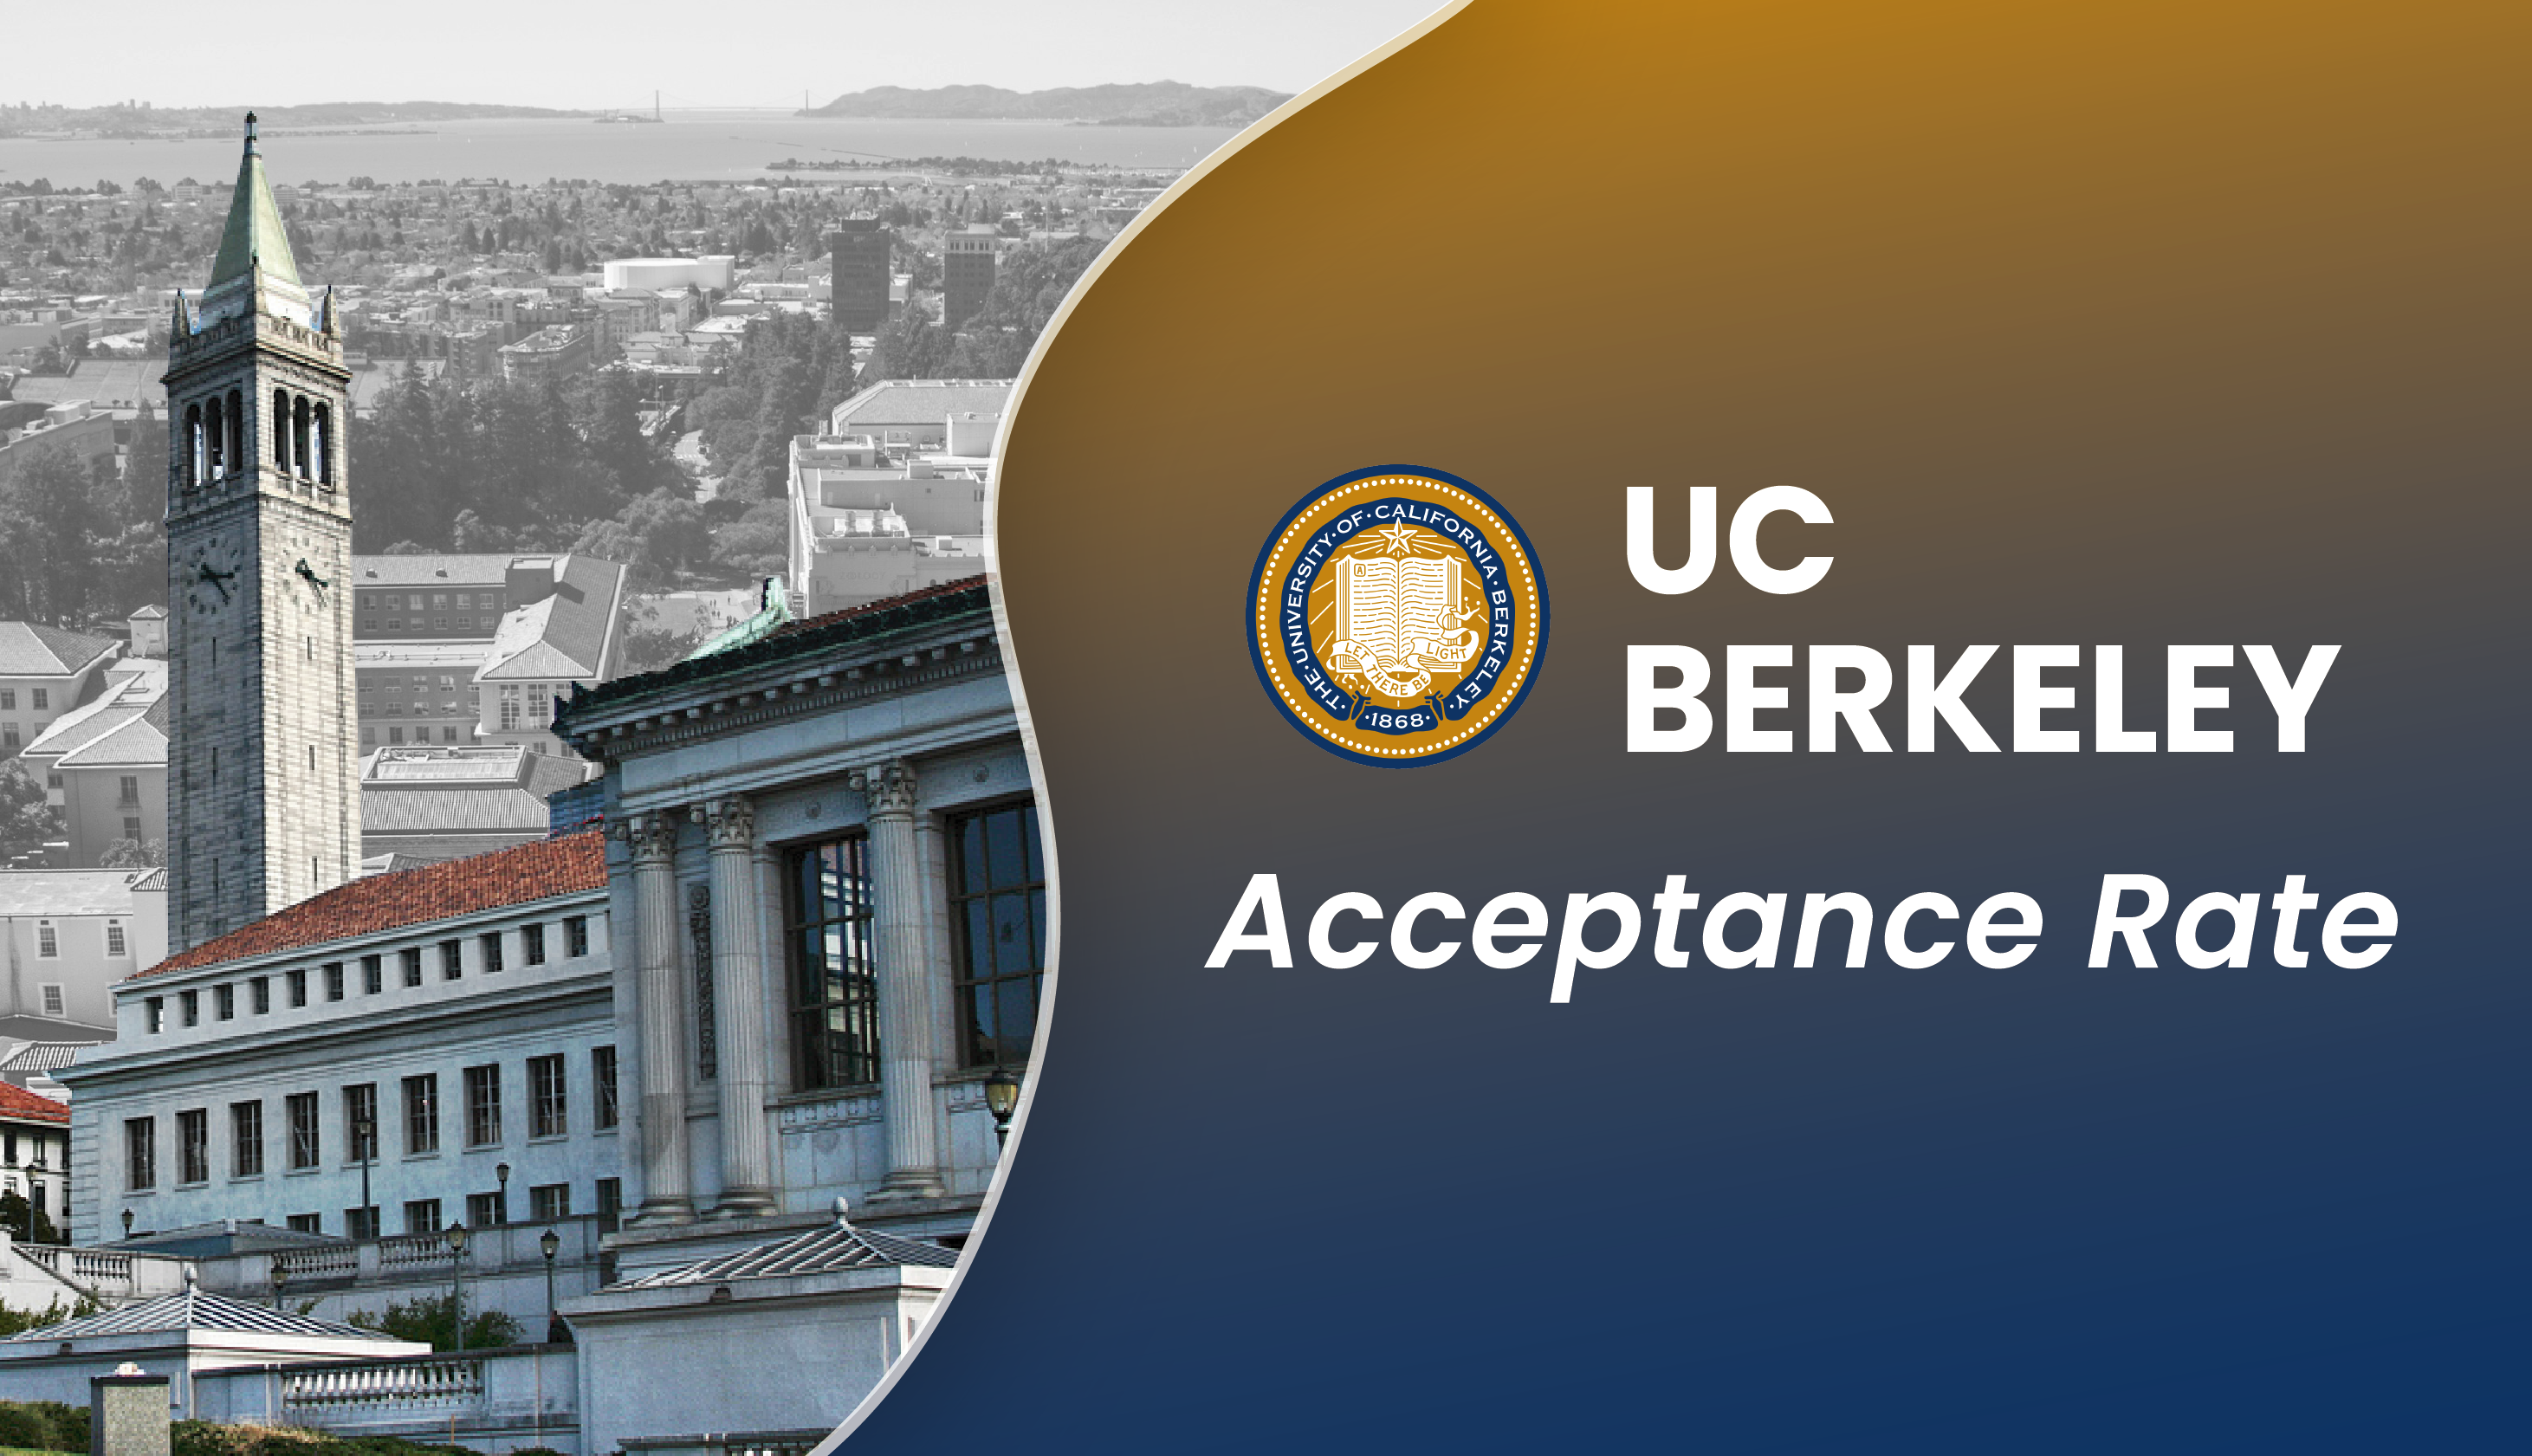 uc berkeley political science phd acceptance rate